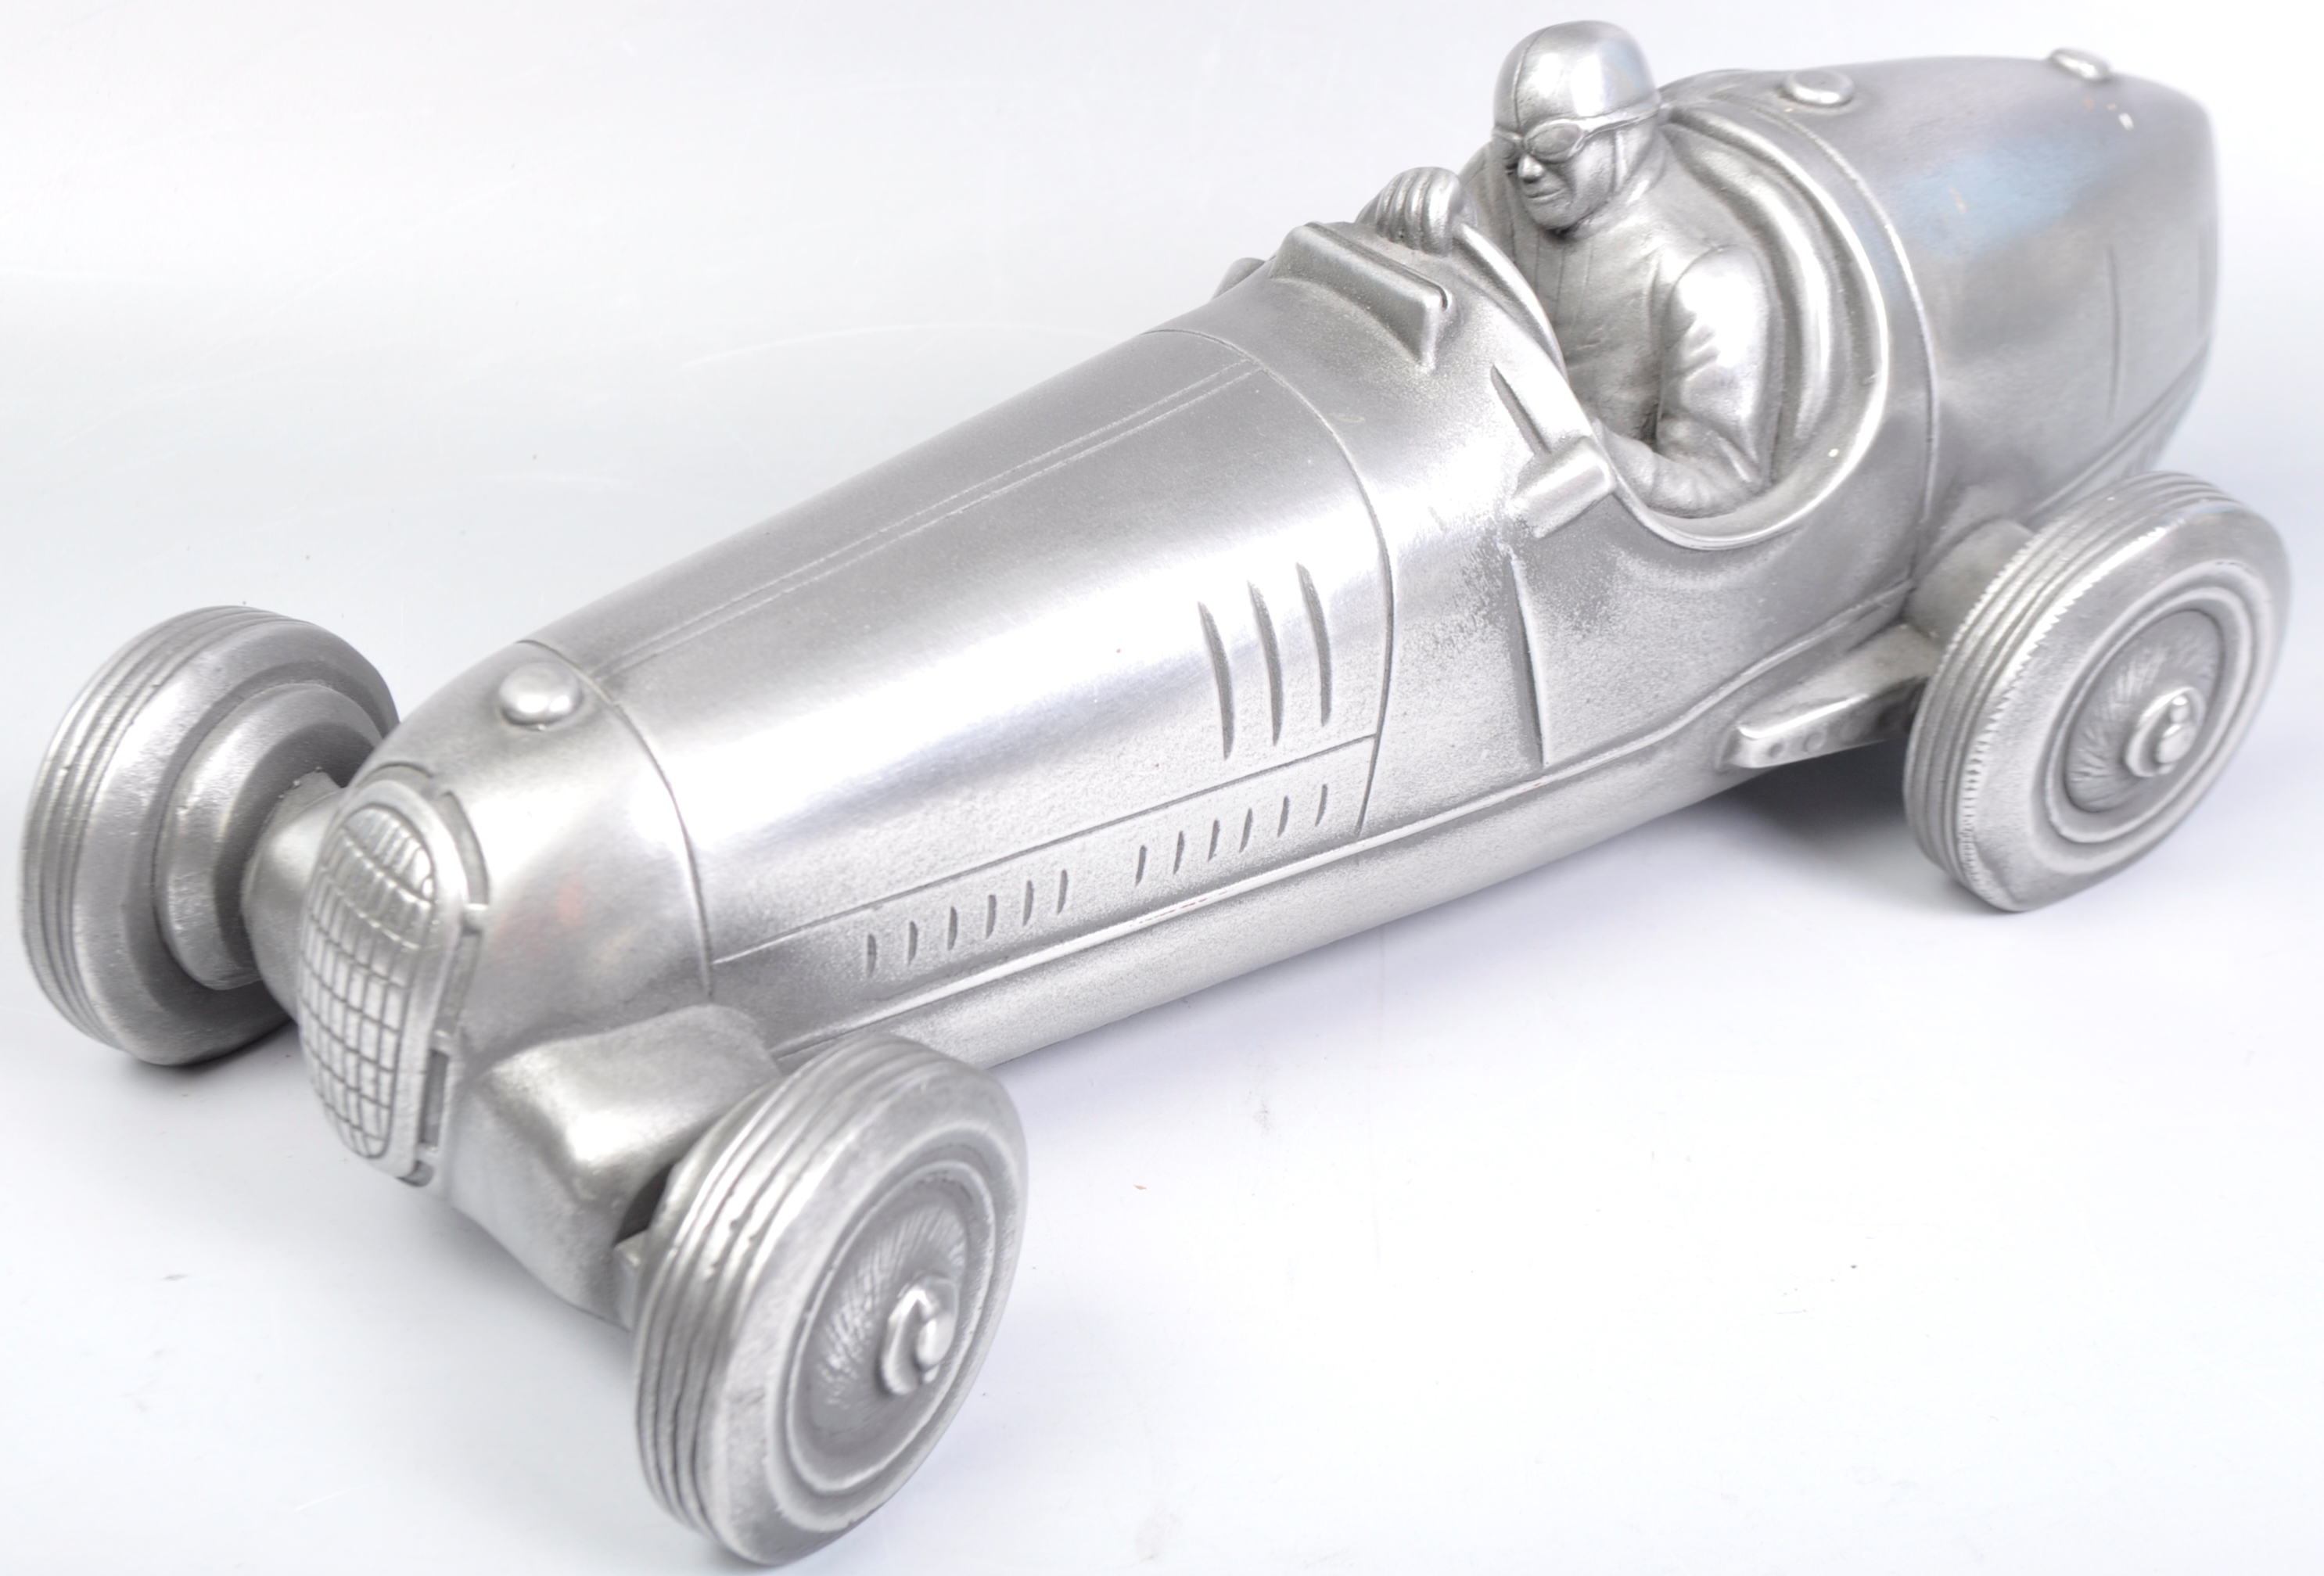 COMPULSION GALLERY PEWTER MODEL OF A 1930'S RACE CAR - Image 2 of 6